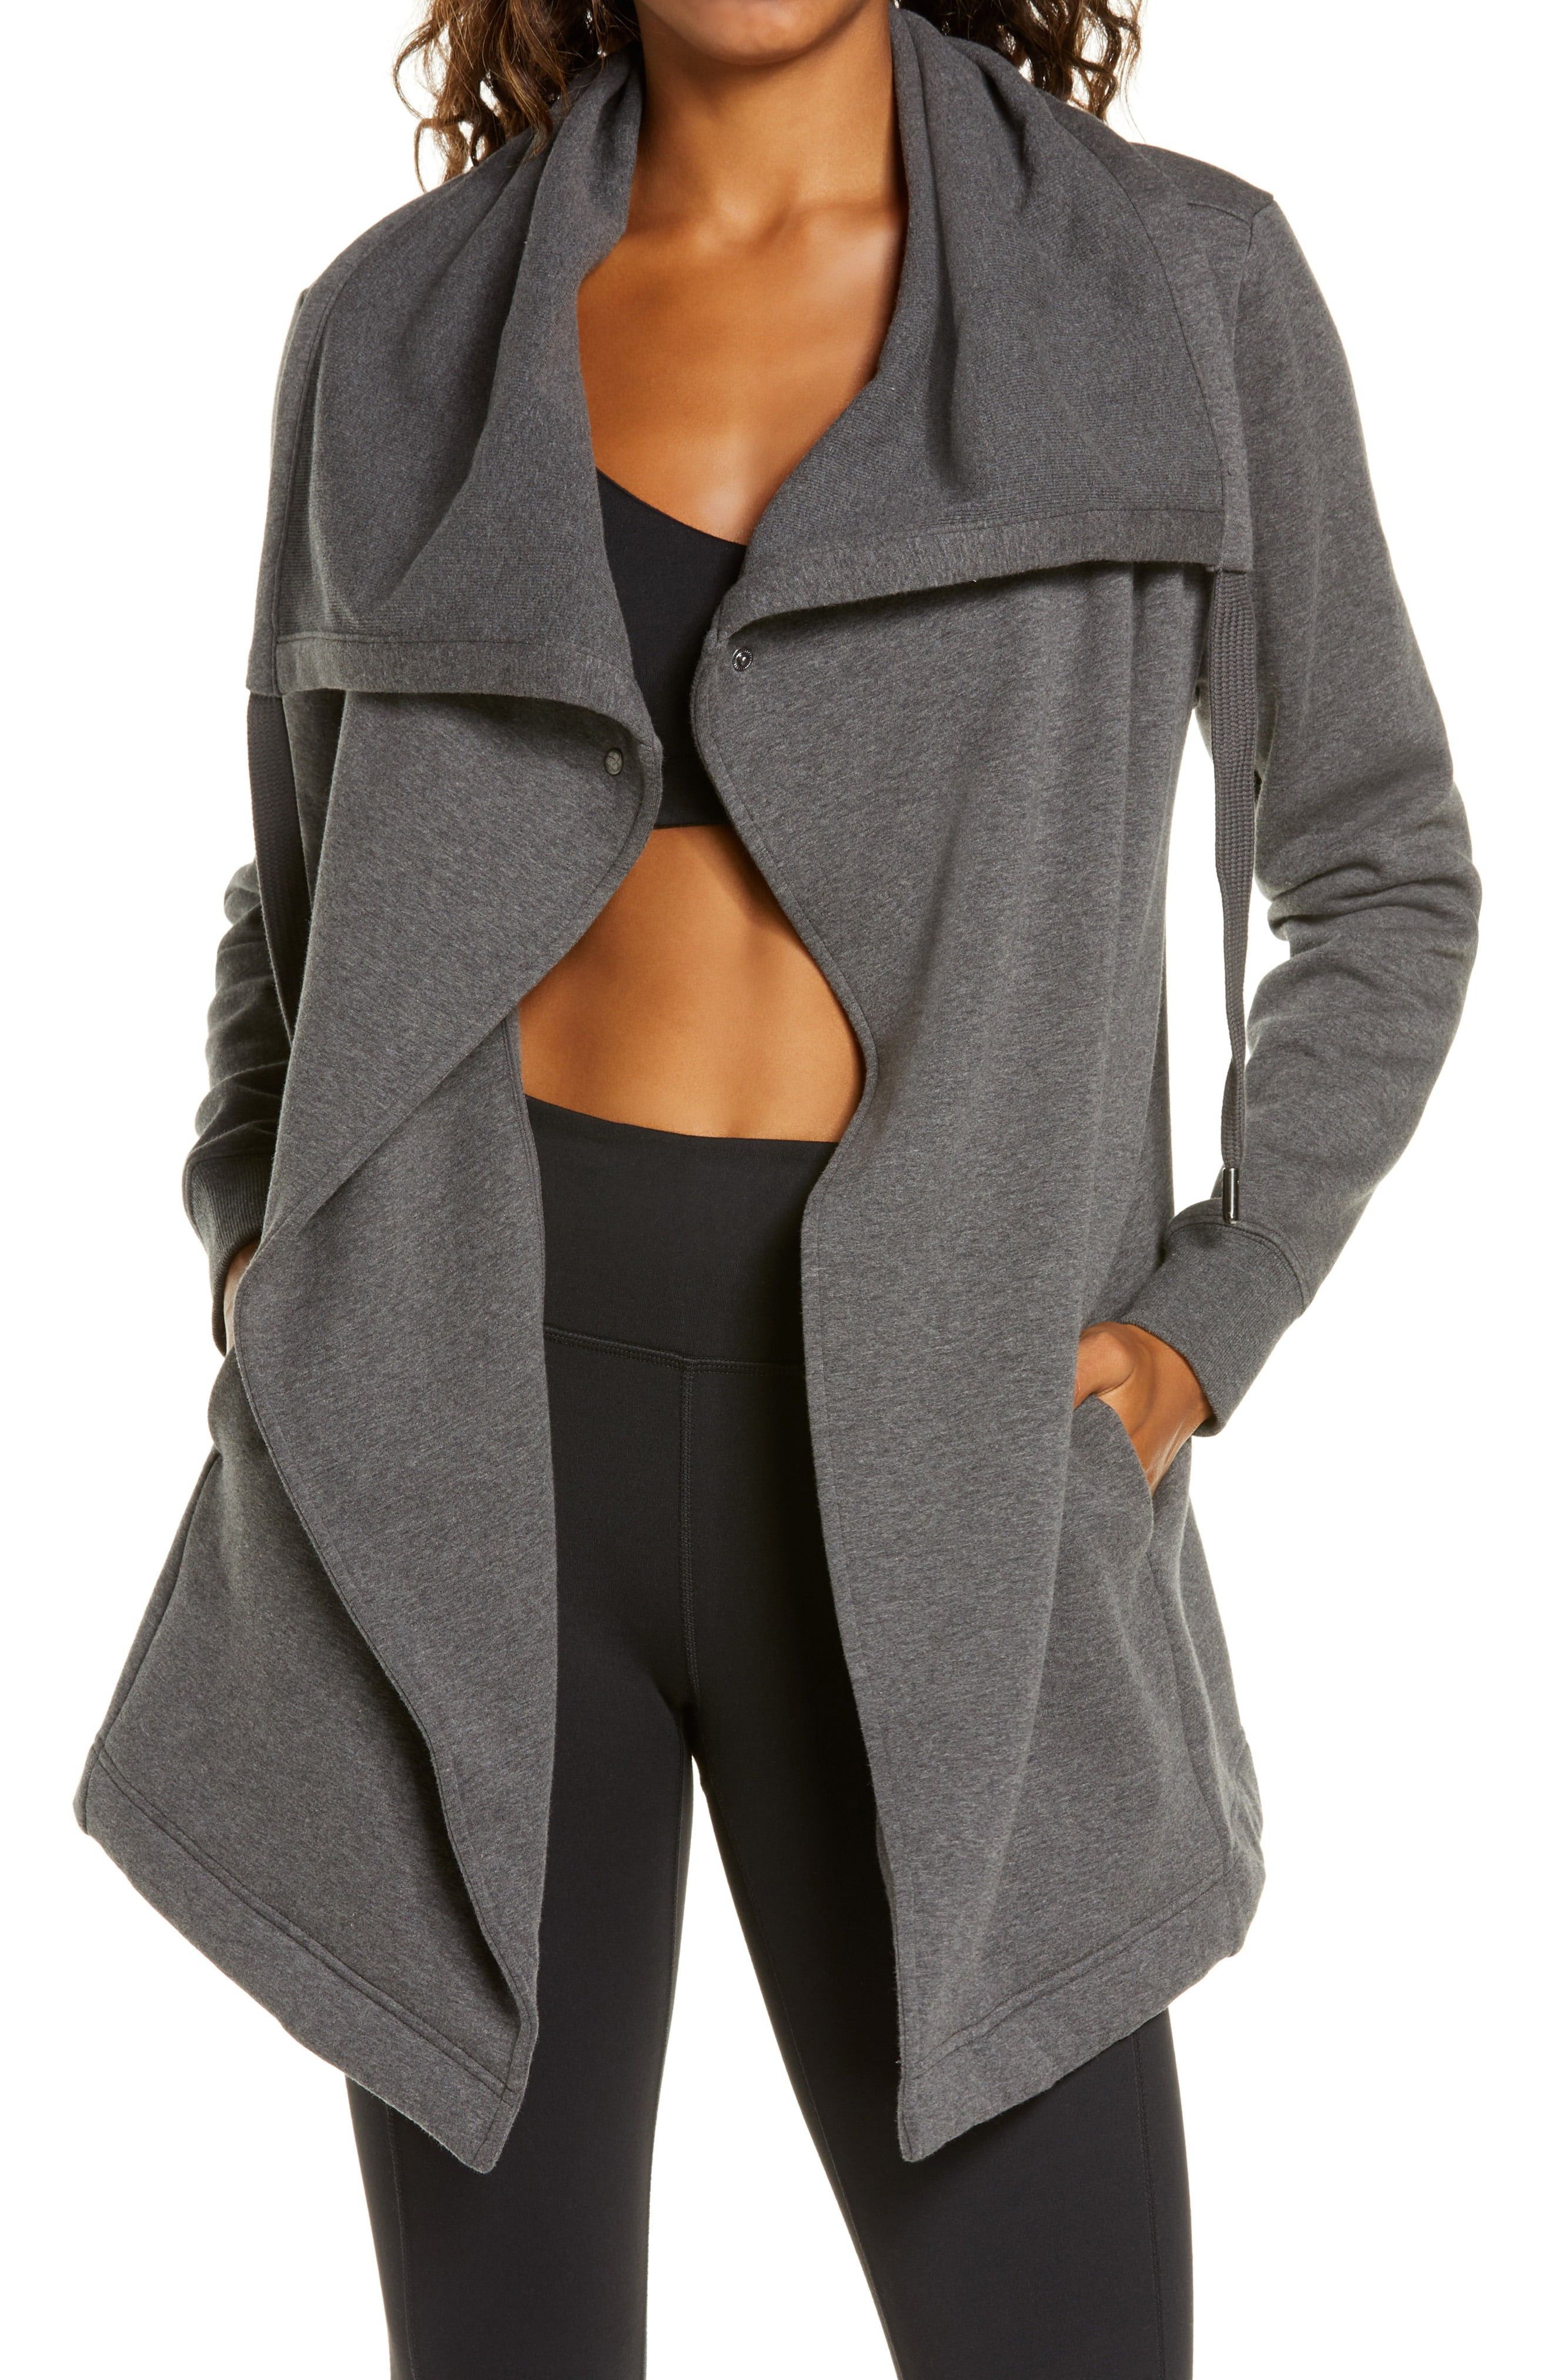 Zella Amazing Cozy Wrap Jacket in Grey Medium Charcoal Heather at Nordstrom, Size Xx-Large | Nordstrom